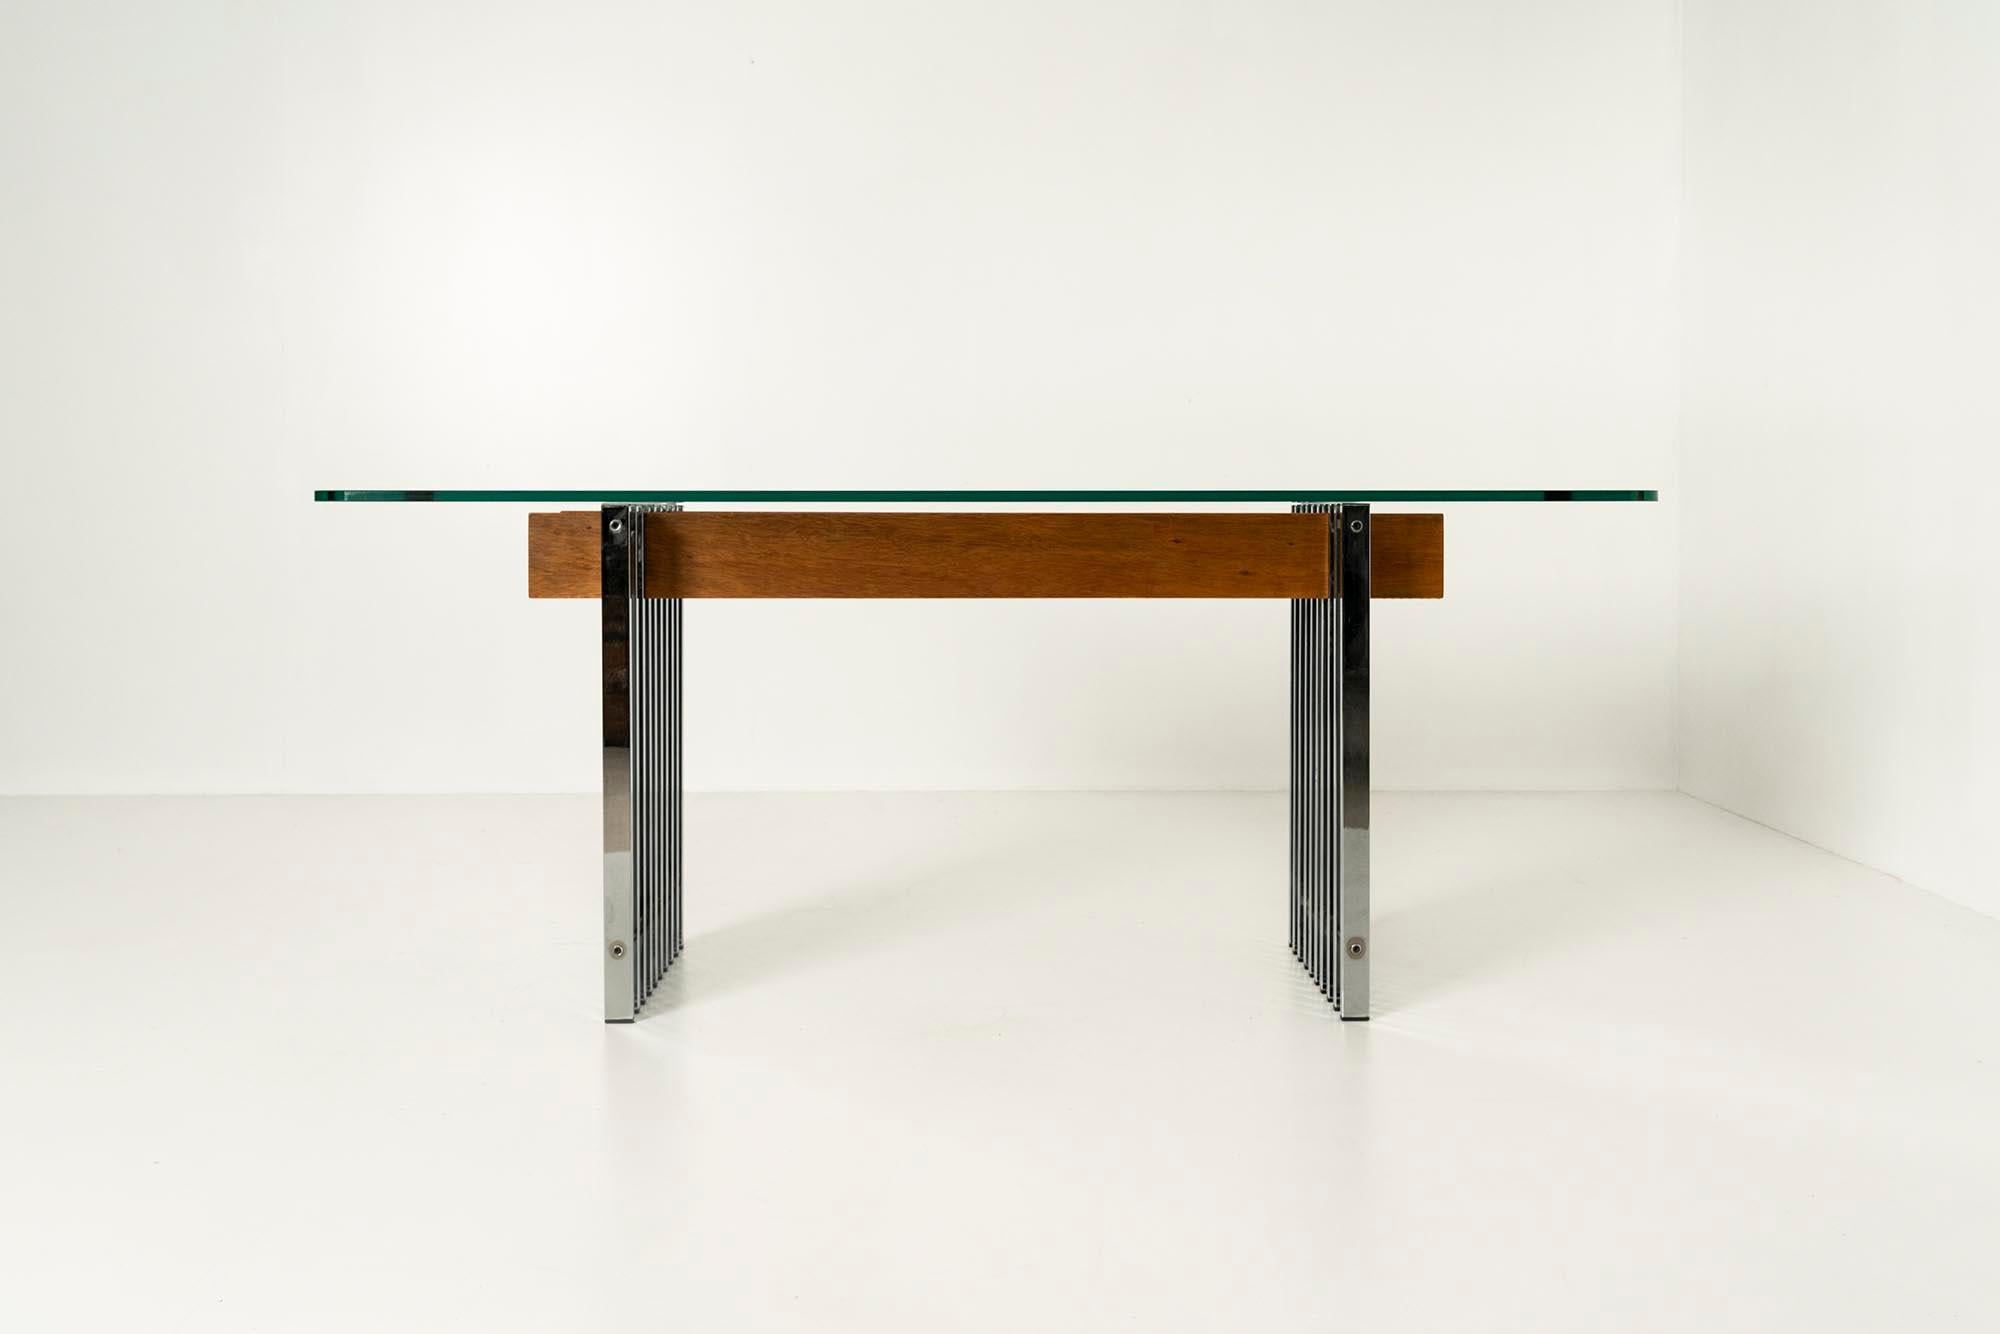 In this beautiful 1970s Italian dining table, the materials of wood, metal, and glass are combined in a pleasant proportion. The metal legs of the table consist of a construction of ten linked bars. In the middle, we see two well-proportioned teak